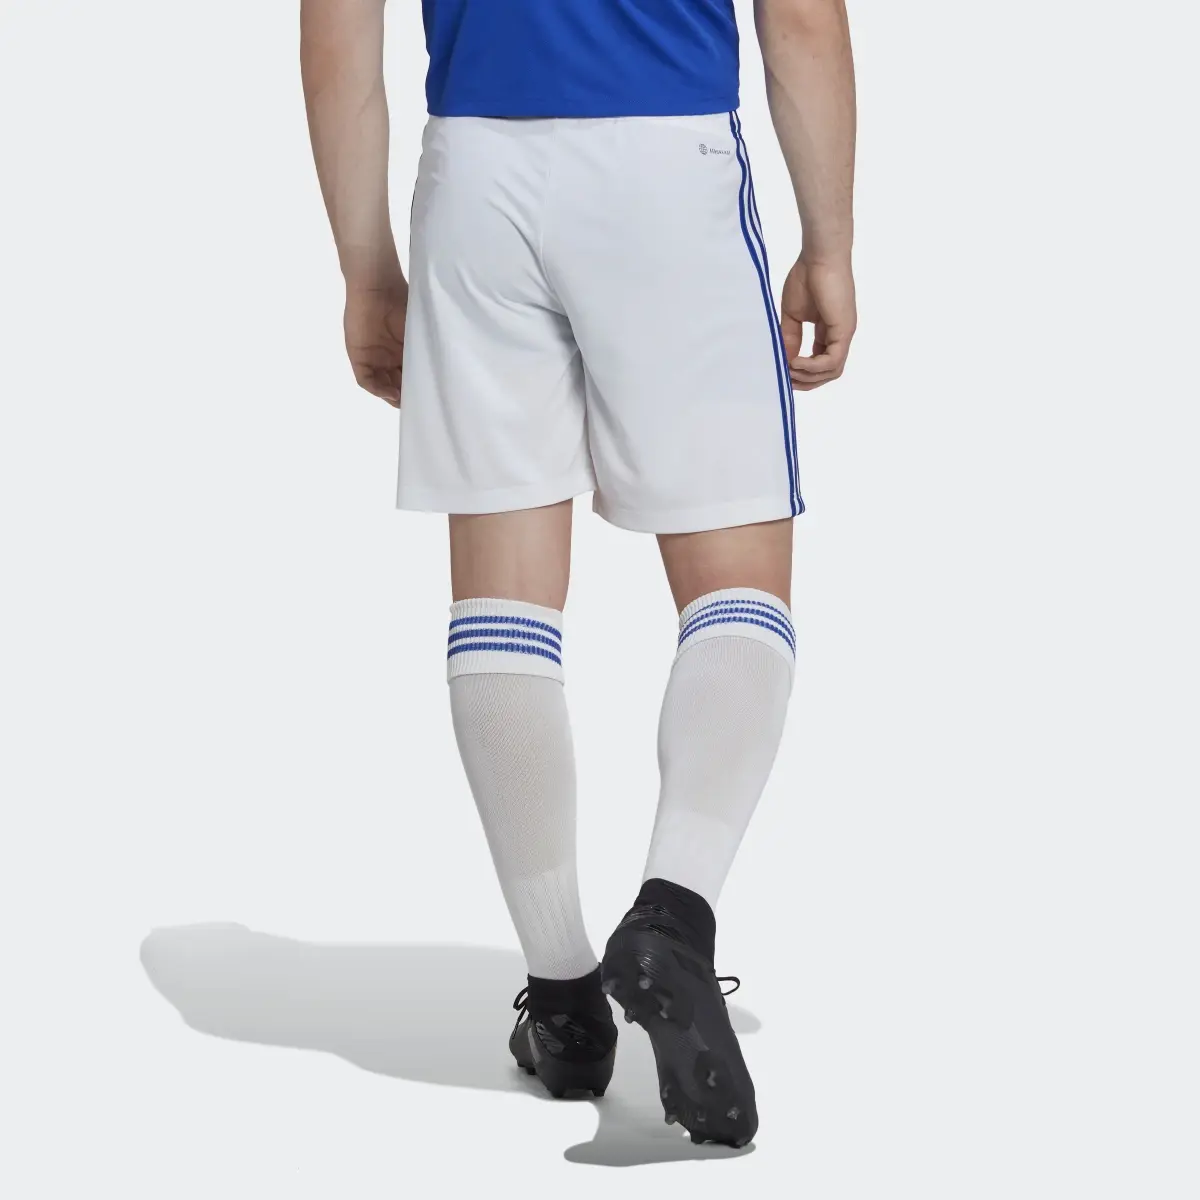 Adidas Leicester City FC 22/23 Home Shorts. 2